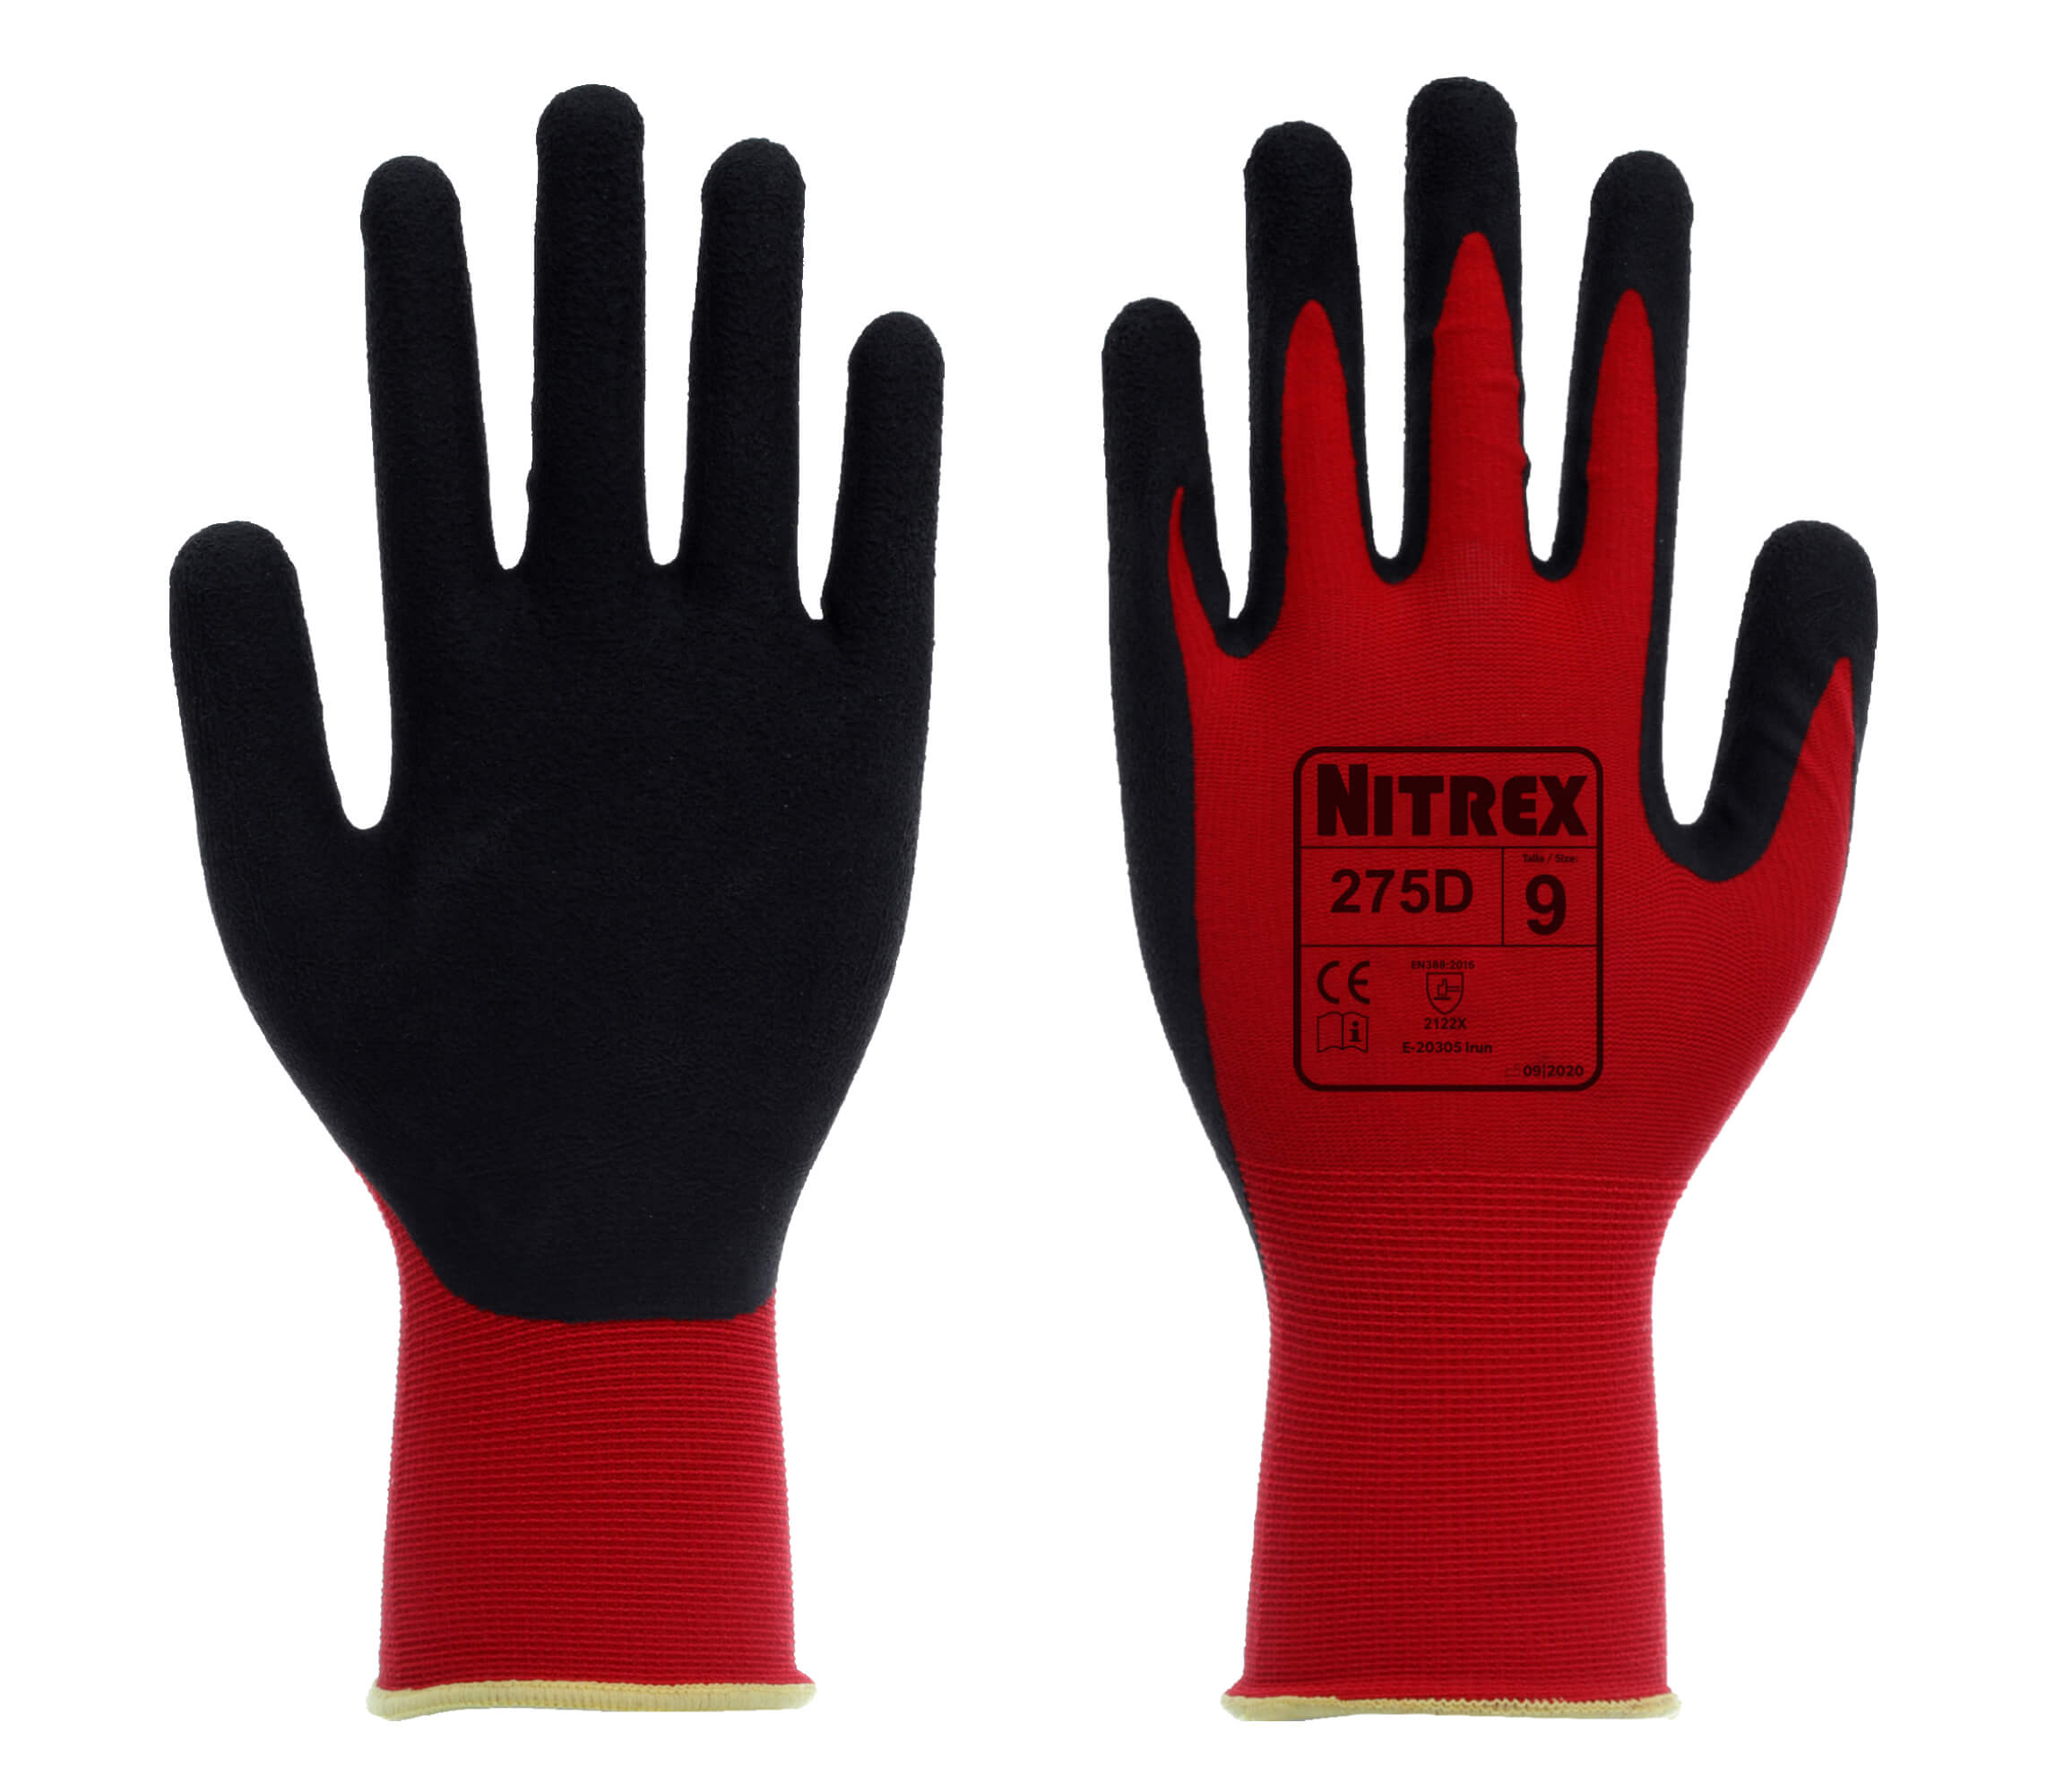 Nitrex 275D - Foam Latex Palm Coated Work Gloves - Seamless Nylon/Spandex Liner Size 7/Small